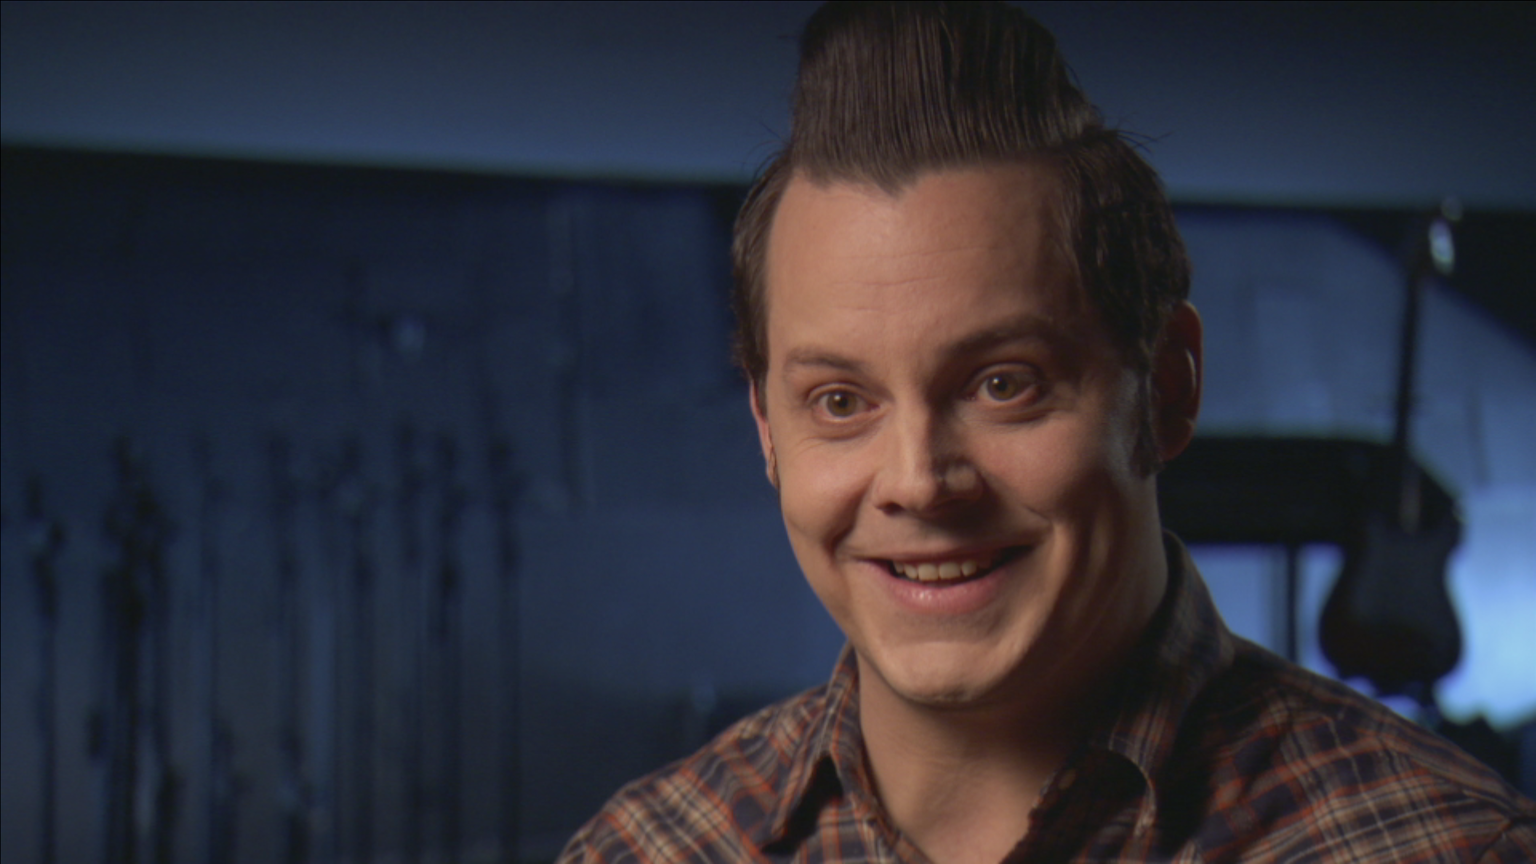 Jack White Songs & Biography | Music White of | | PBS PBS Country Member the | Stripes | Ken Burns